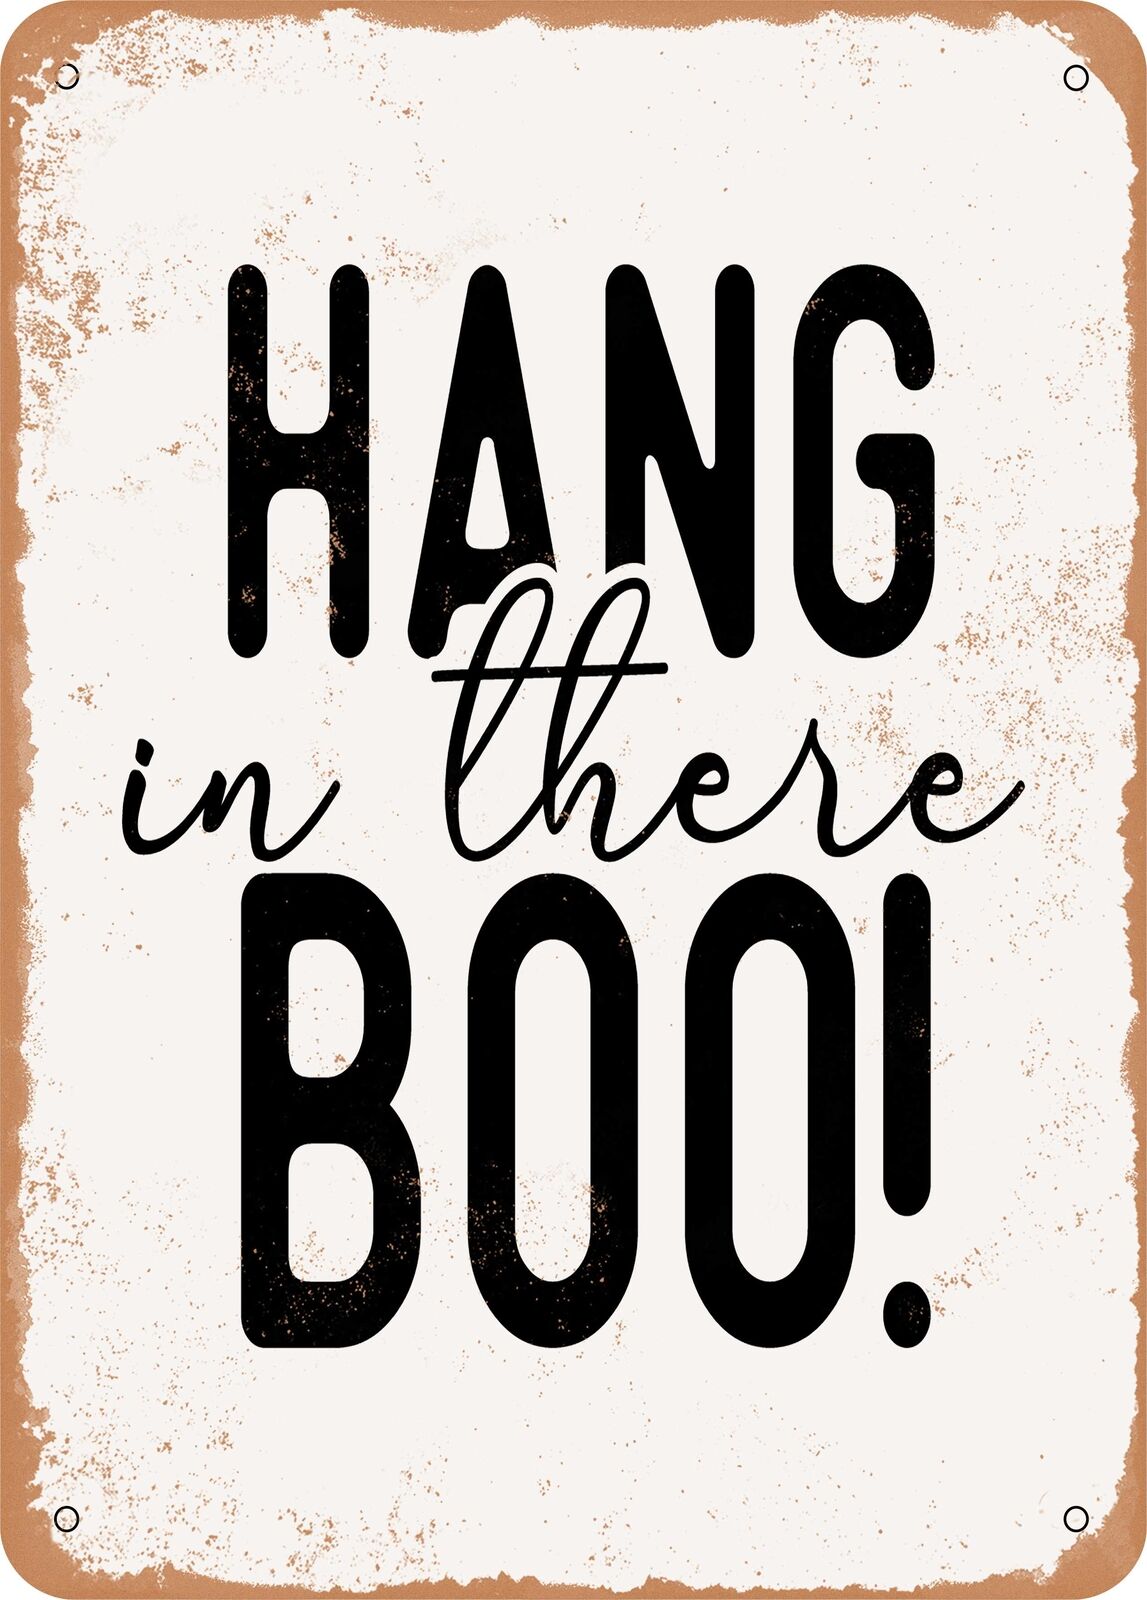 Metal Sign - Hang In there Boo - Vintage Rusty Look